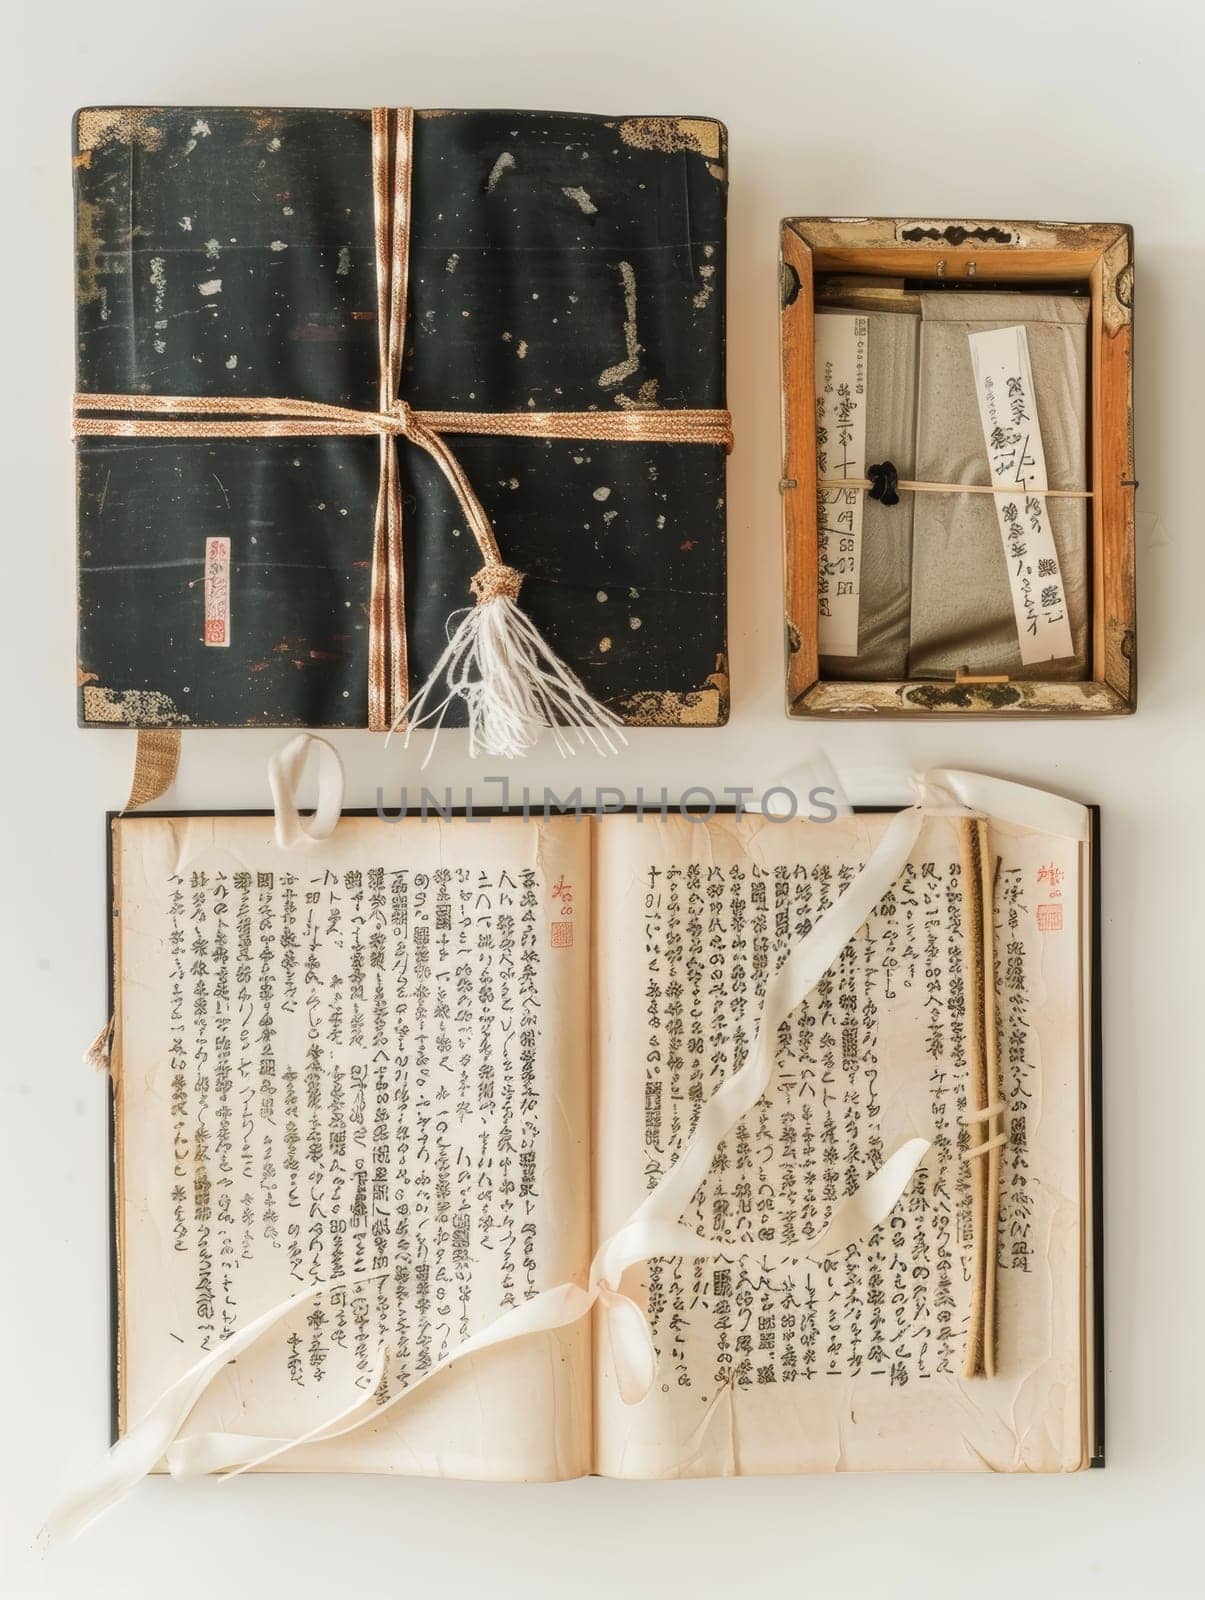 An open antique Japanese book tied with a cream ribbon, with textured pages beside a wooden box holding scroll-like items. by sfinks